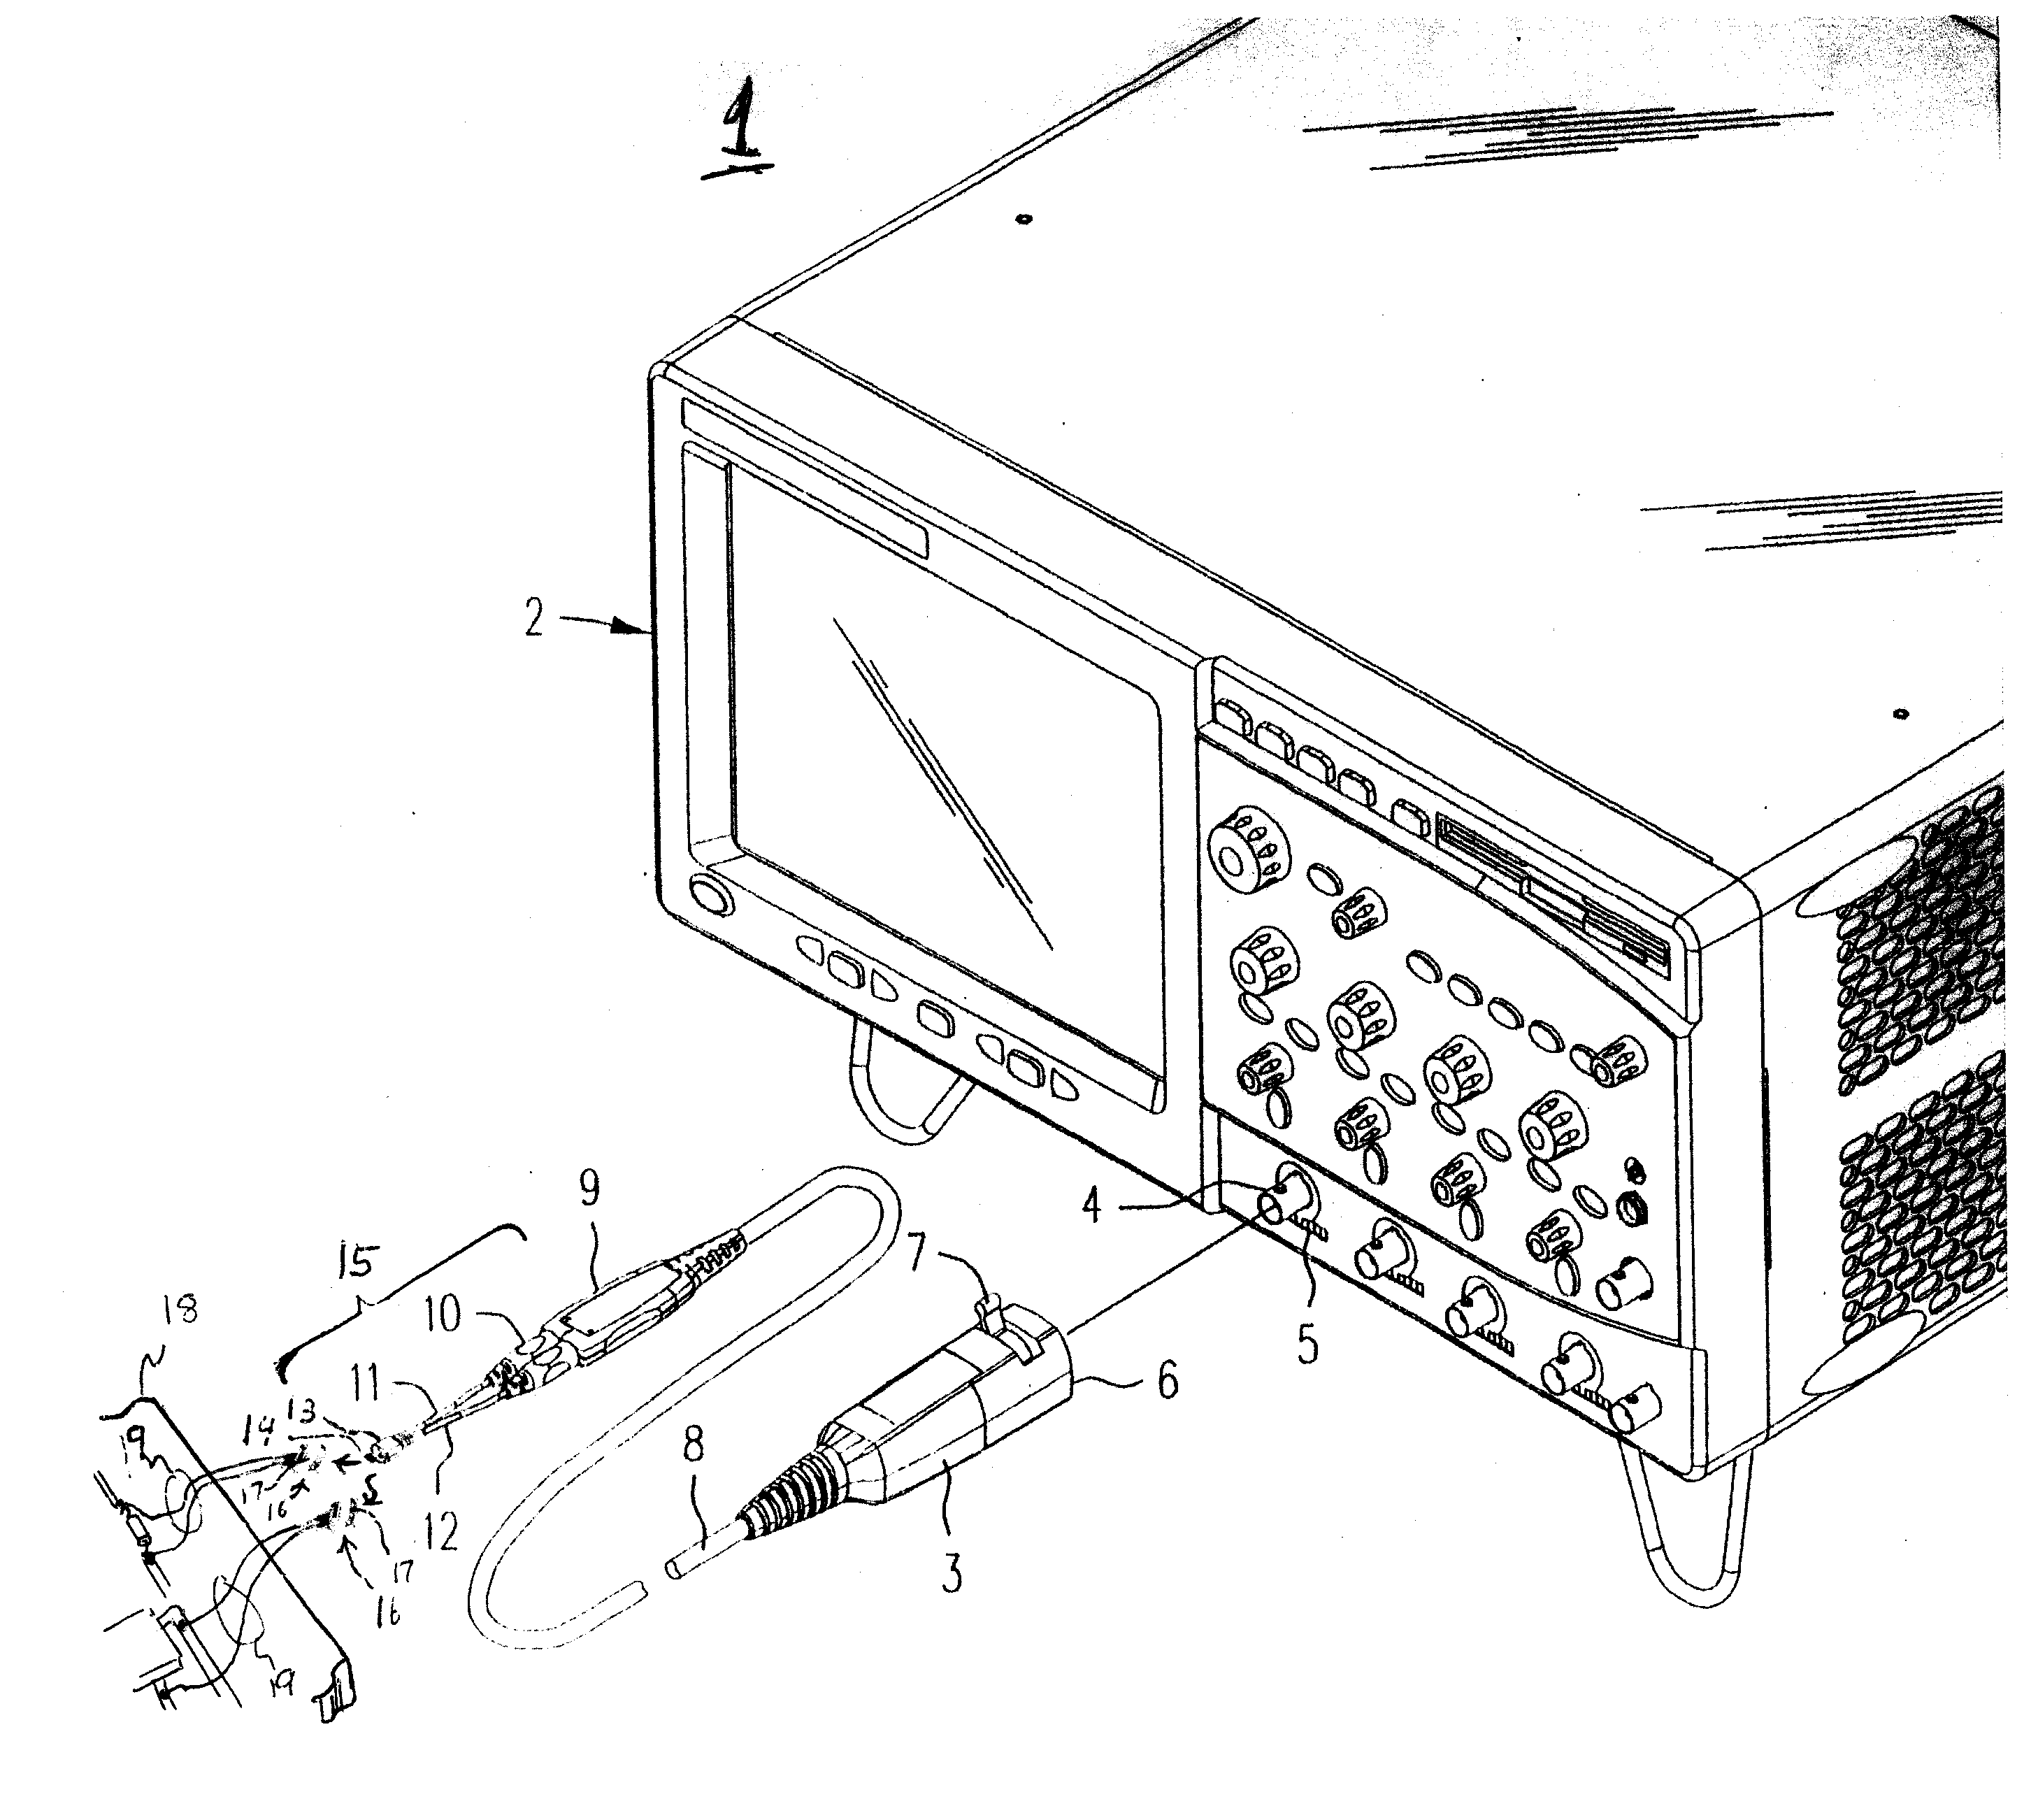 Zif connection accessory and zif browser for an electronic probe